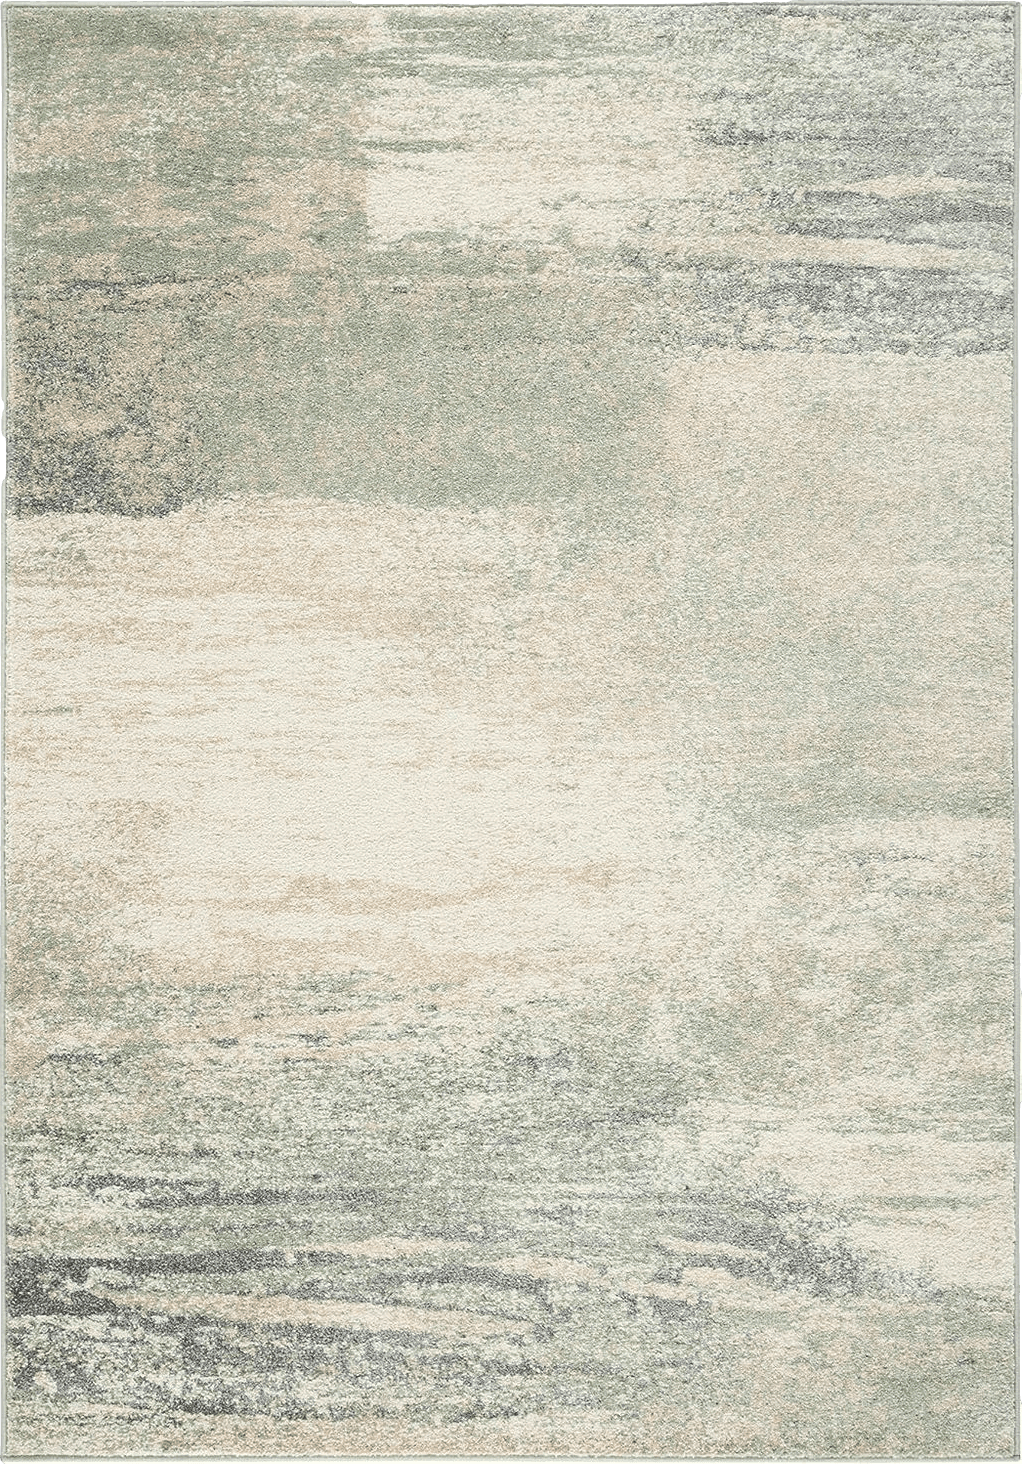 Area Green SAFAVIEH Adirondack Collection Area Rug - 6' x 9', Ivory & Sage, Modern Abstract Design, Non-Shedding & Easy Care, Ideal for High Traffic Areas in Living Room, Bedroom (ADR112W)